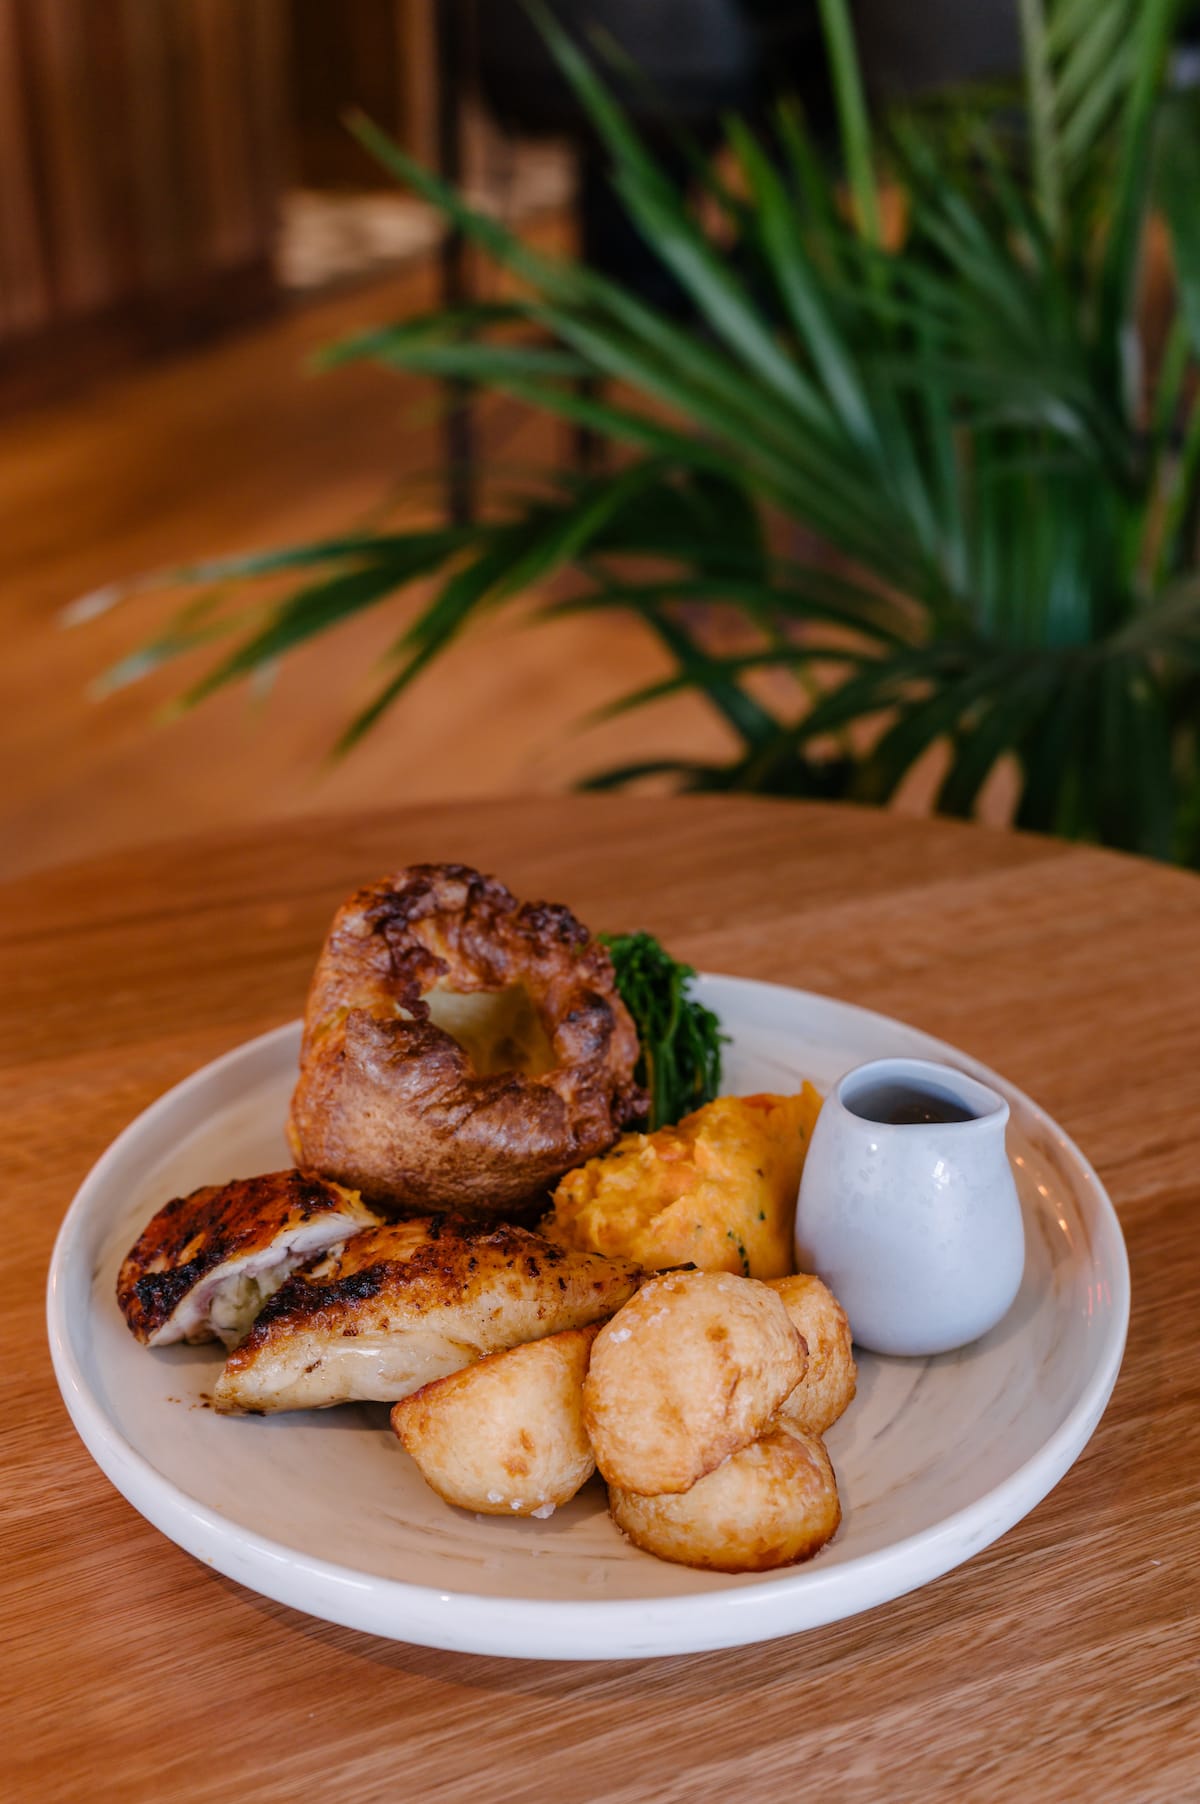 sunday roasts hotel delany darby st cooks hill newcastle nsw